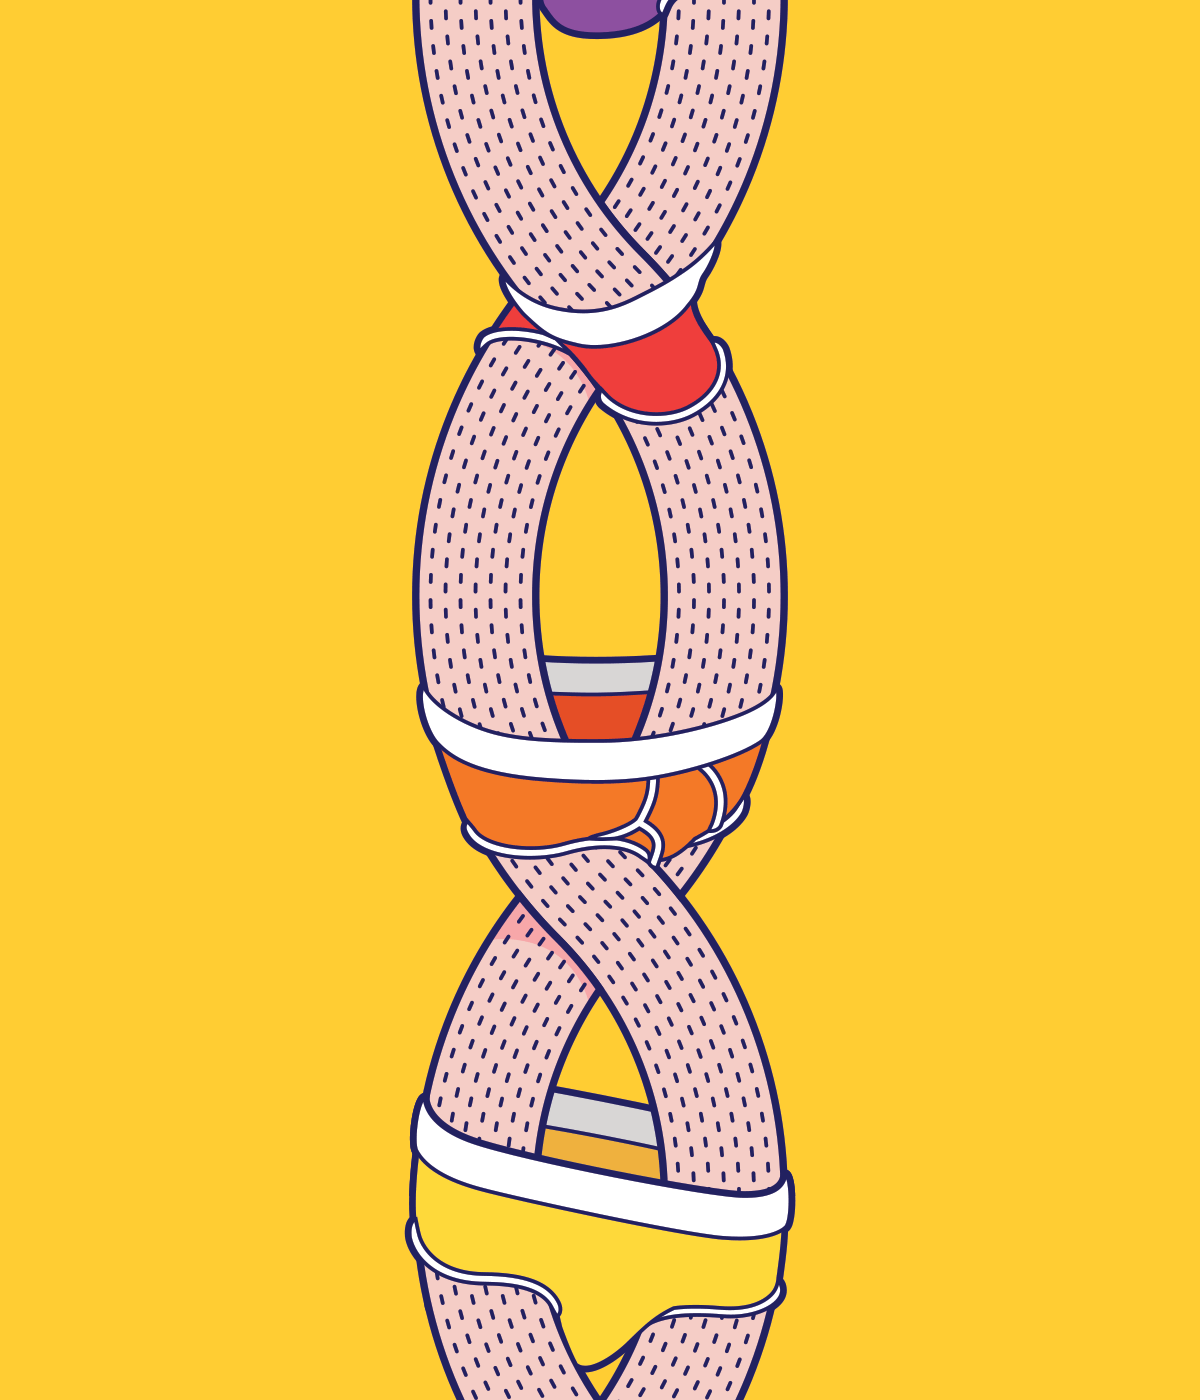 illustration_andre_levy_zhion_vector_pop_dna_gay_pride_underwear_rainbow_hairy_legs_spiral_animation.gif